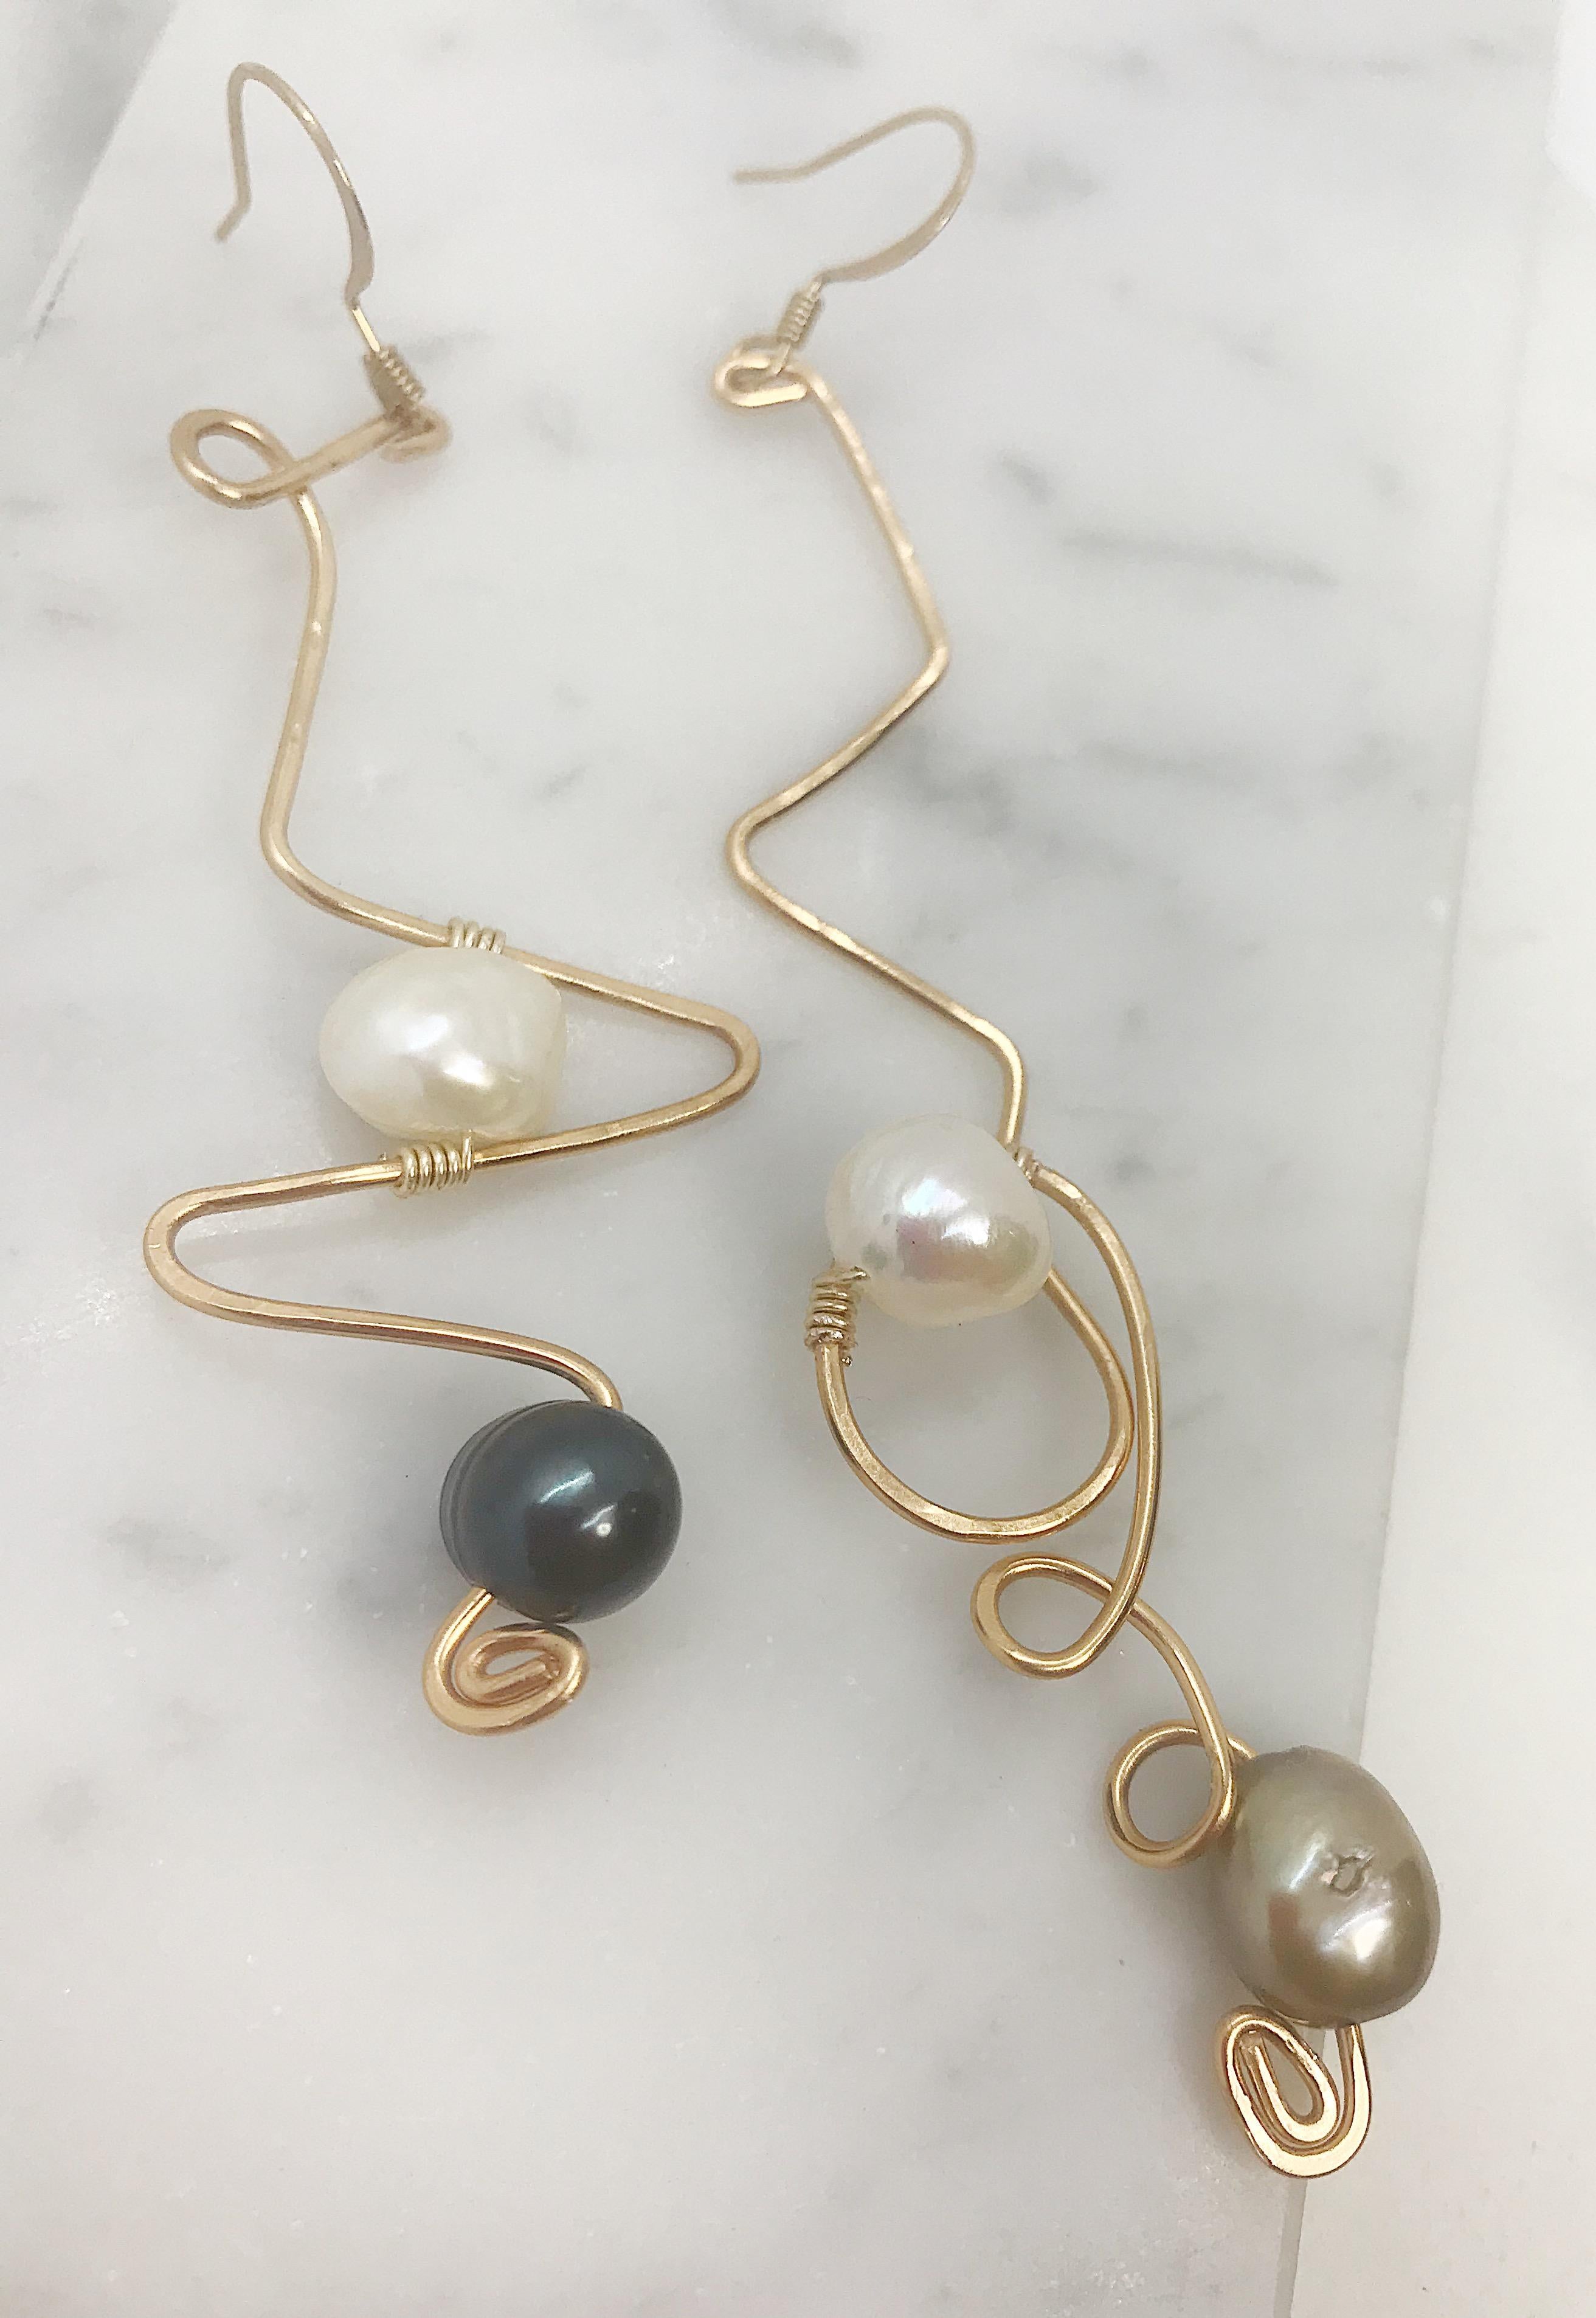 Gold brass with 22k gold fill Texture Earrings with white, chartreuse, and eggplant freshwater pearls. 